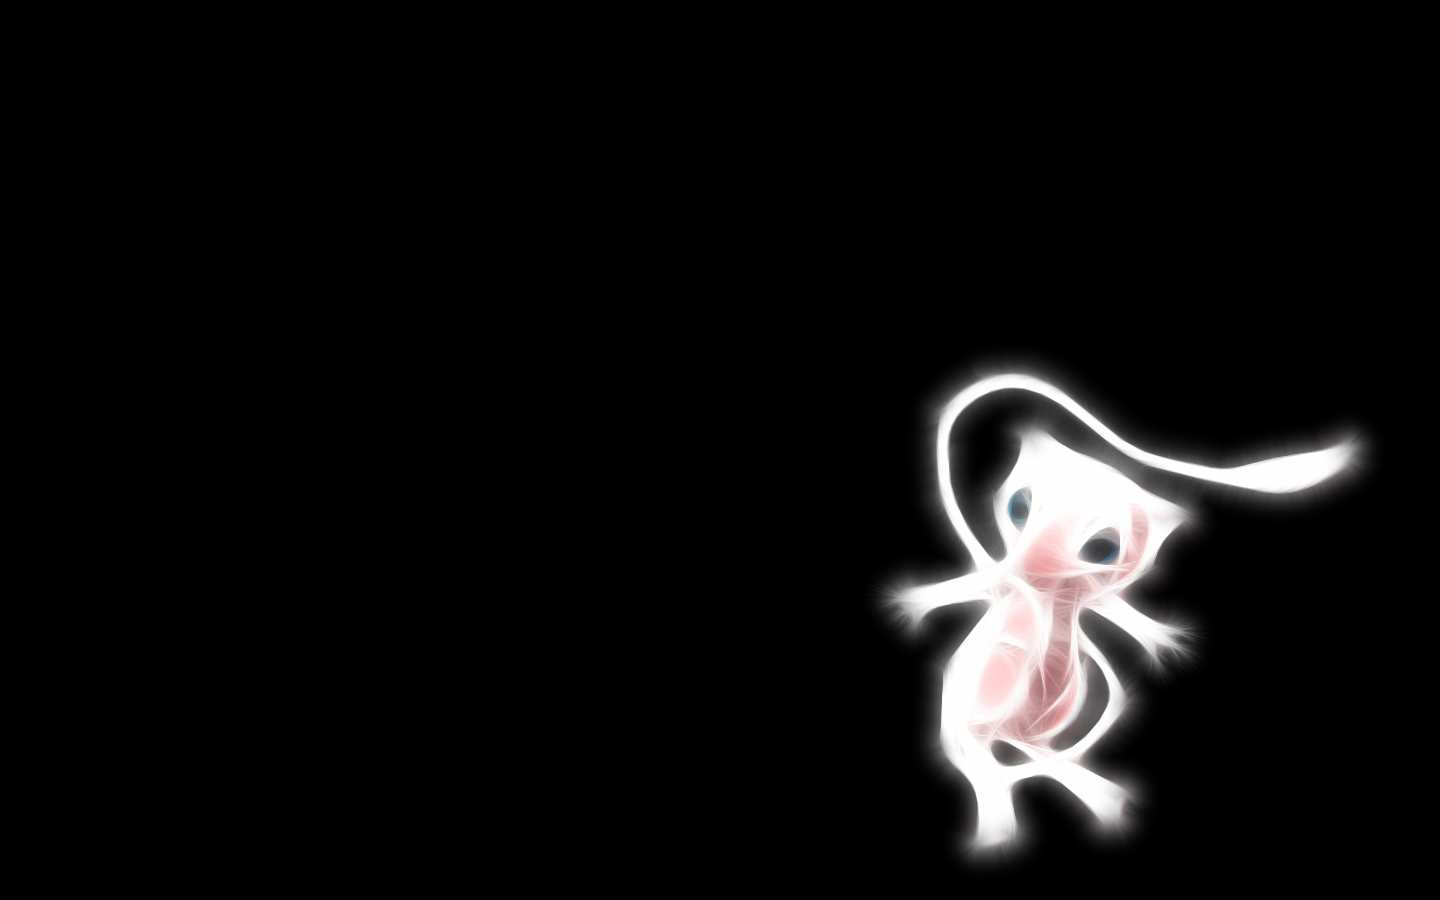 Mew pokemon images Mew Wallpaper HD wallpaper and